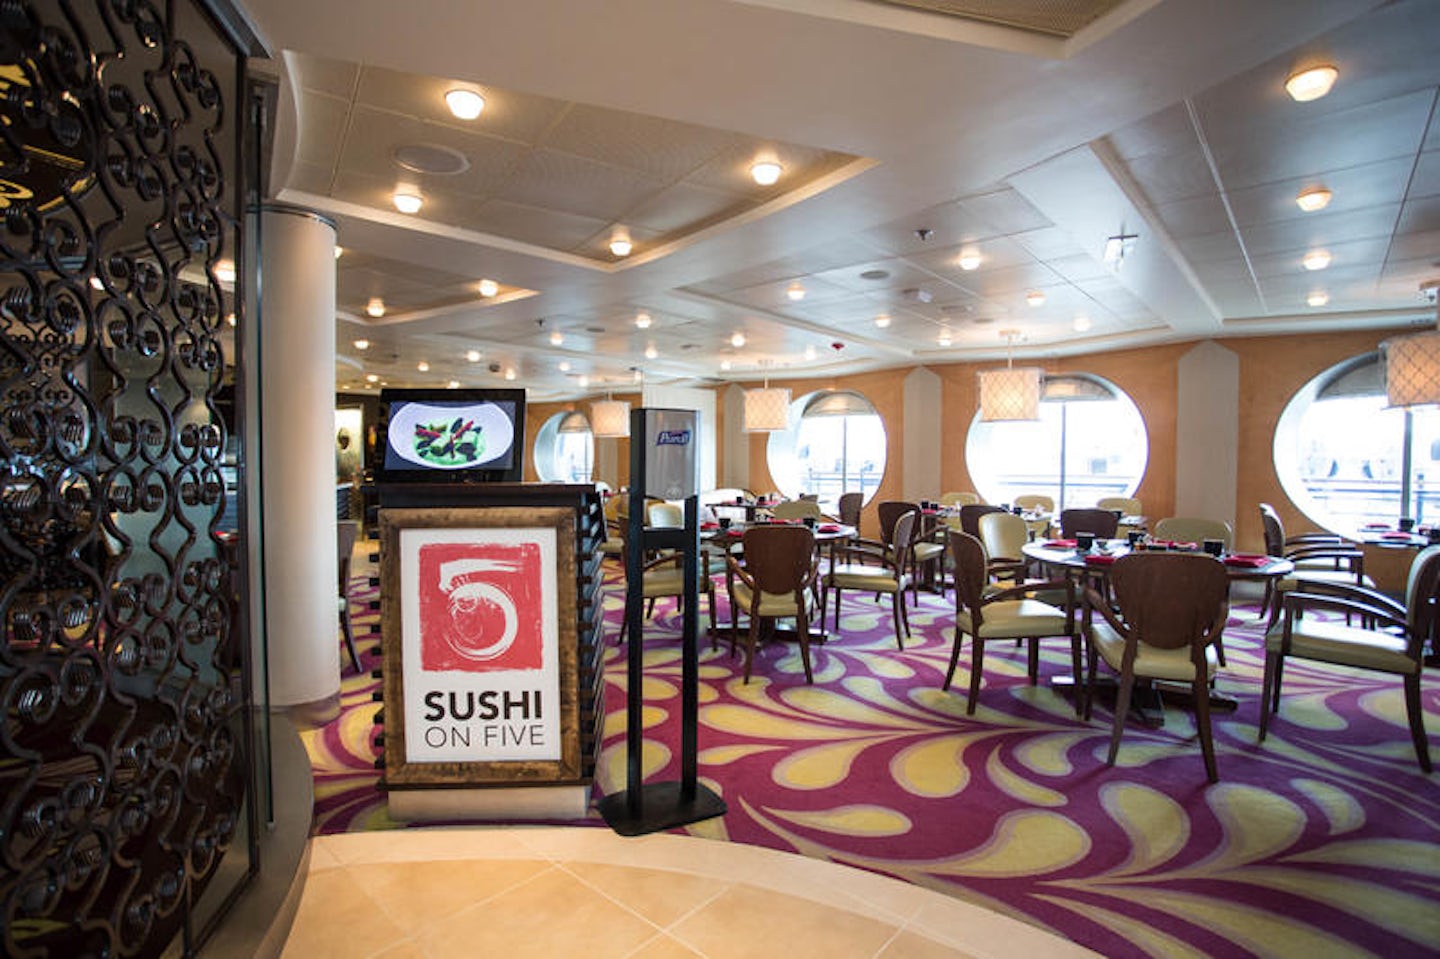 Sushi on Five on Celebrity Infinity